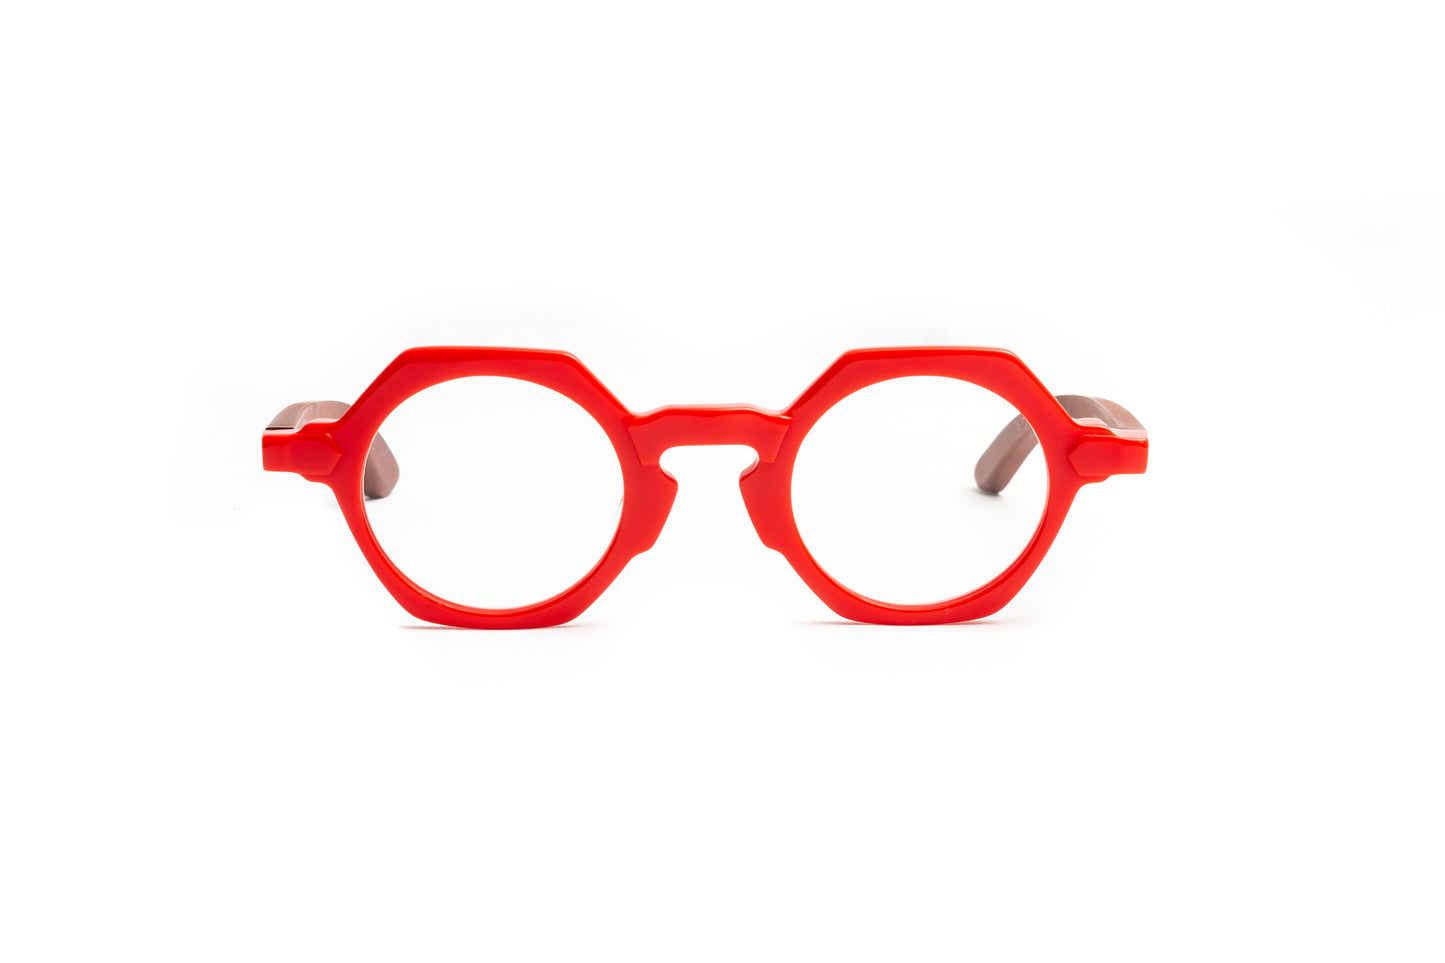 St. Moritz round pantos red acetate reading glasses with cherry wood temples by Eyejets, unisex designer reading glasses